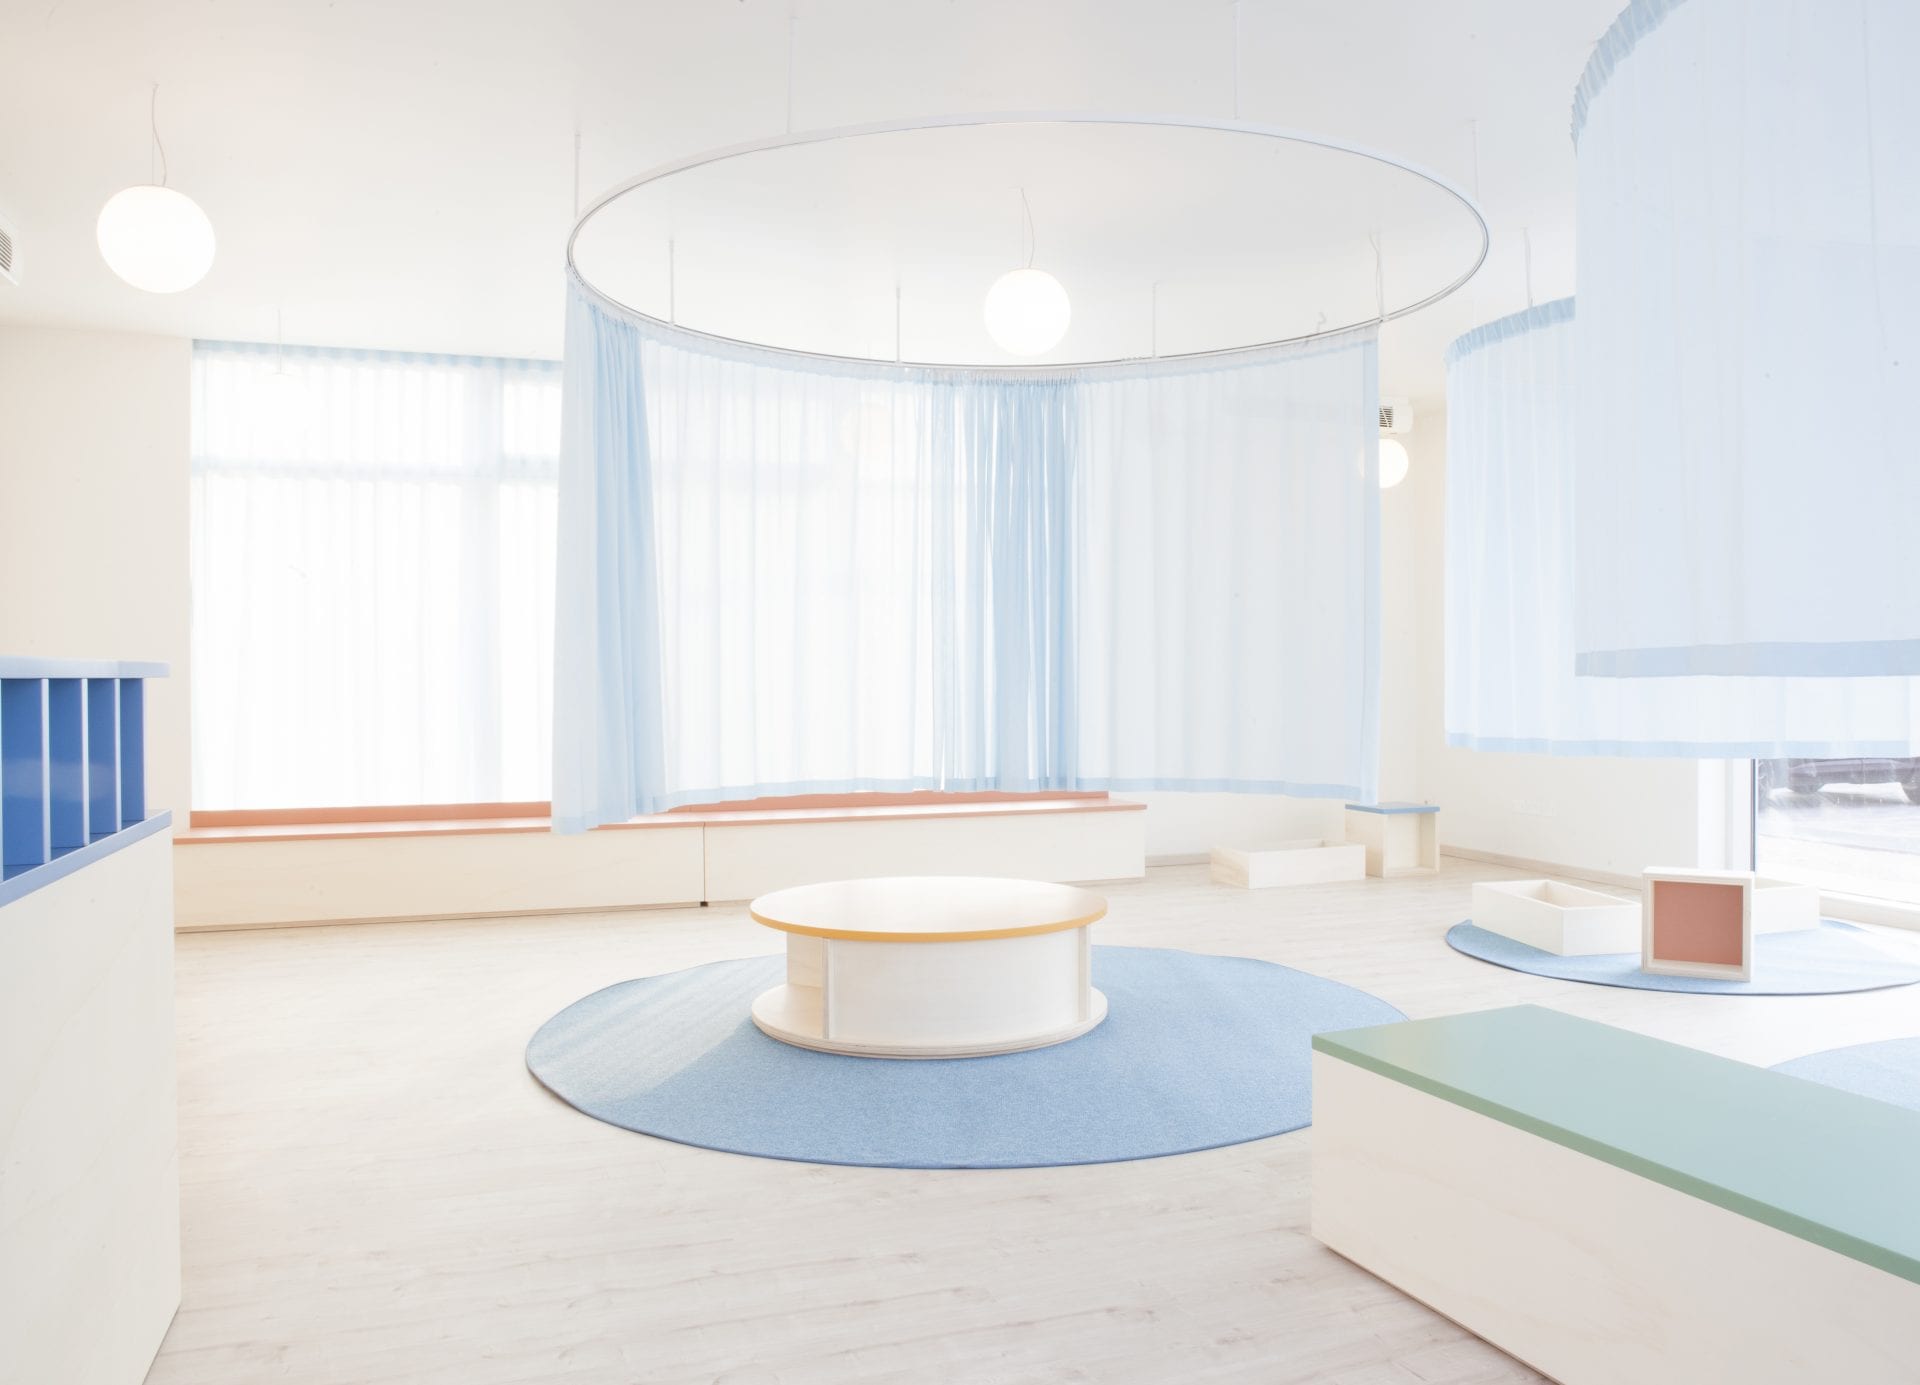 A palette of pastels permeates within this dental clinic